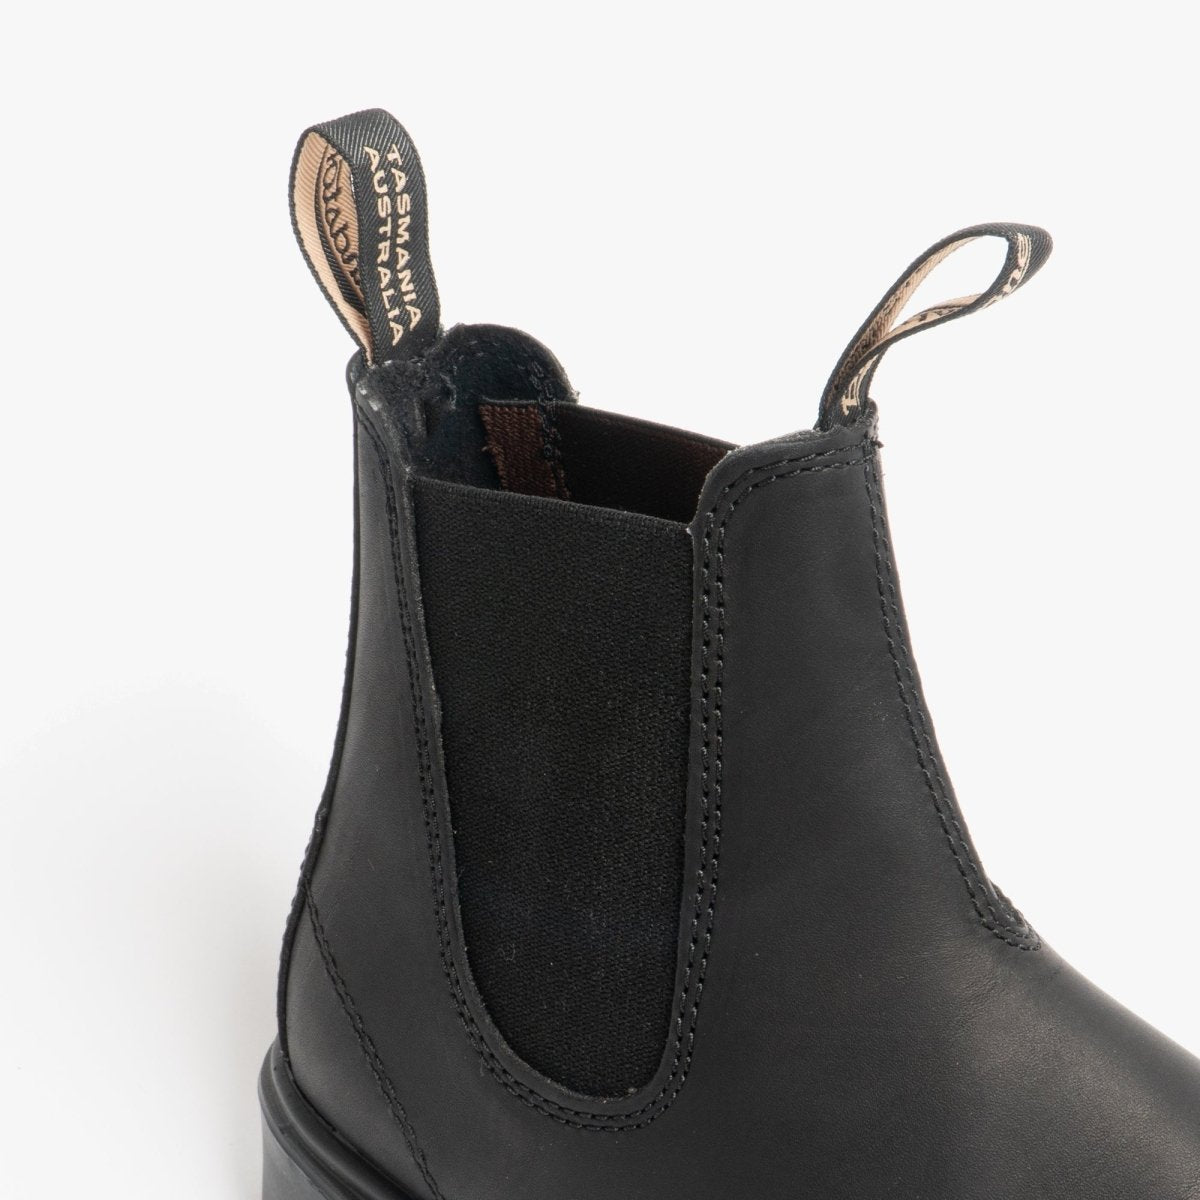 Blundstone 063 Unisex Leather Chelsea Boots Black 063 - 3 | STB.co.uk